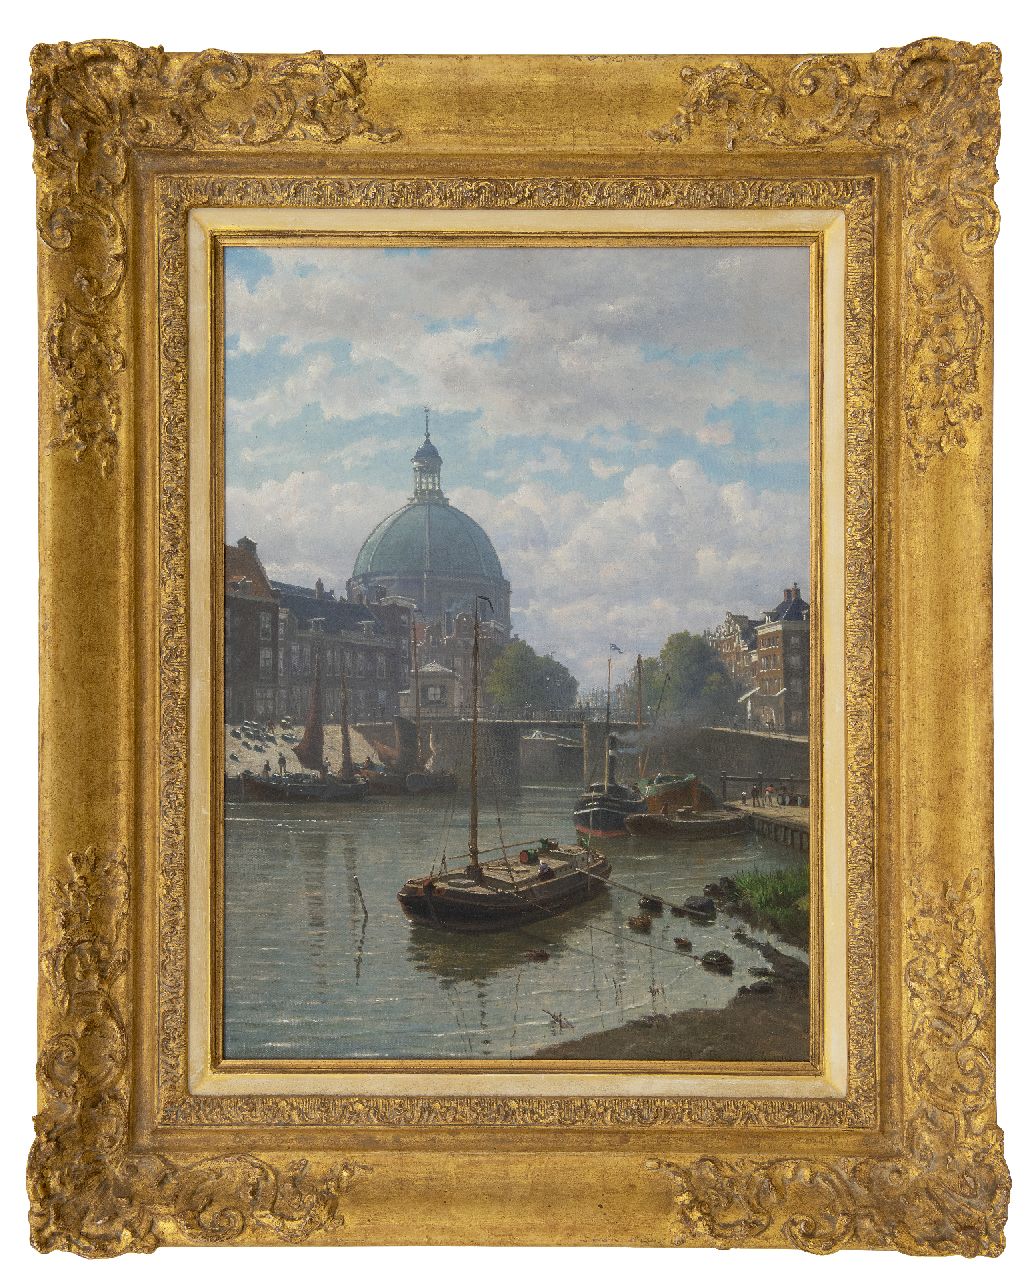 Greive J.C.  | Johan Conrad 'Coen' Greive | Paintings offered for sale | Moored work ships at the Amsterdam Haarlemmersluis near the Ronde Lutherse Kerk, oil on canvas 57.9 x 42.4 cm, signed l.r. and dated 1890